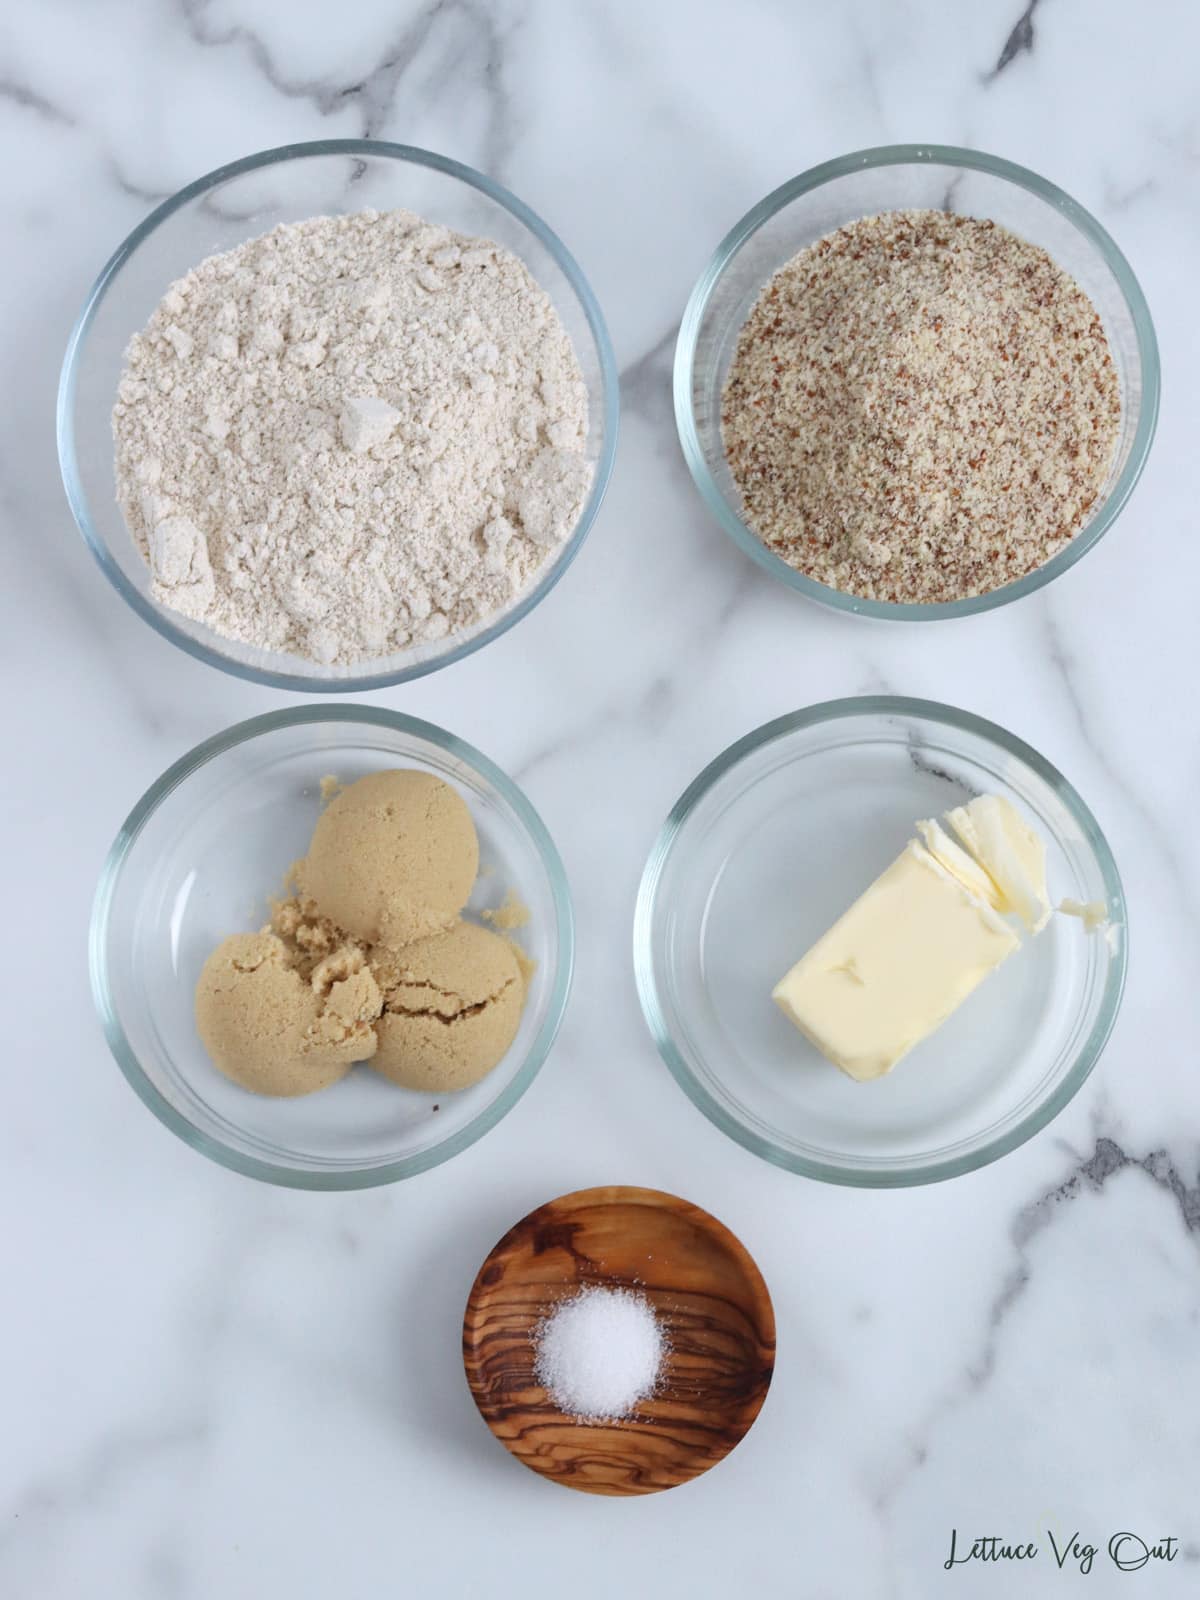 Small dishes with ingredients to make gluten free cheesecake crust.